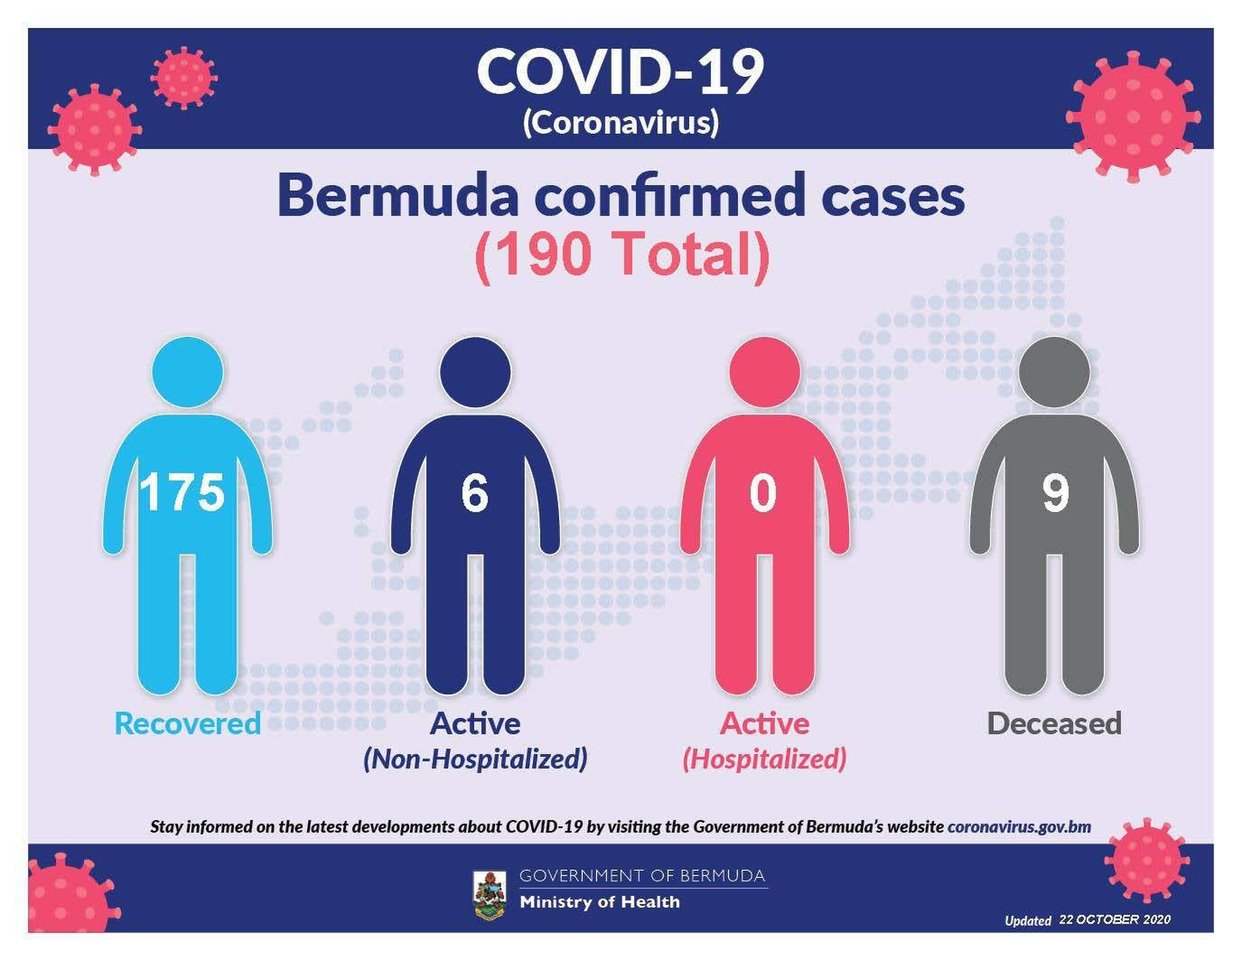 Two new COVID-19 cases reported in Bermuda, 23 October